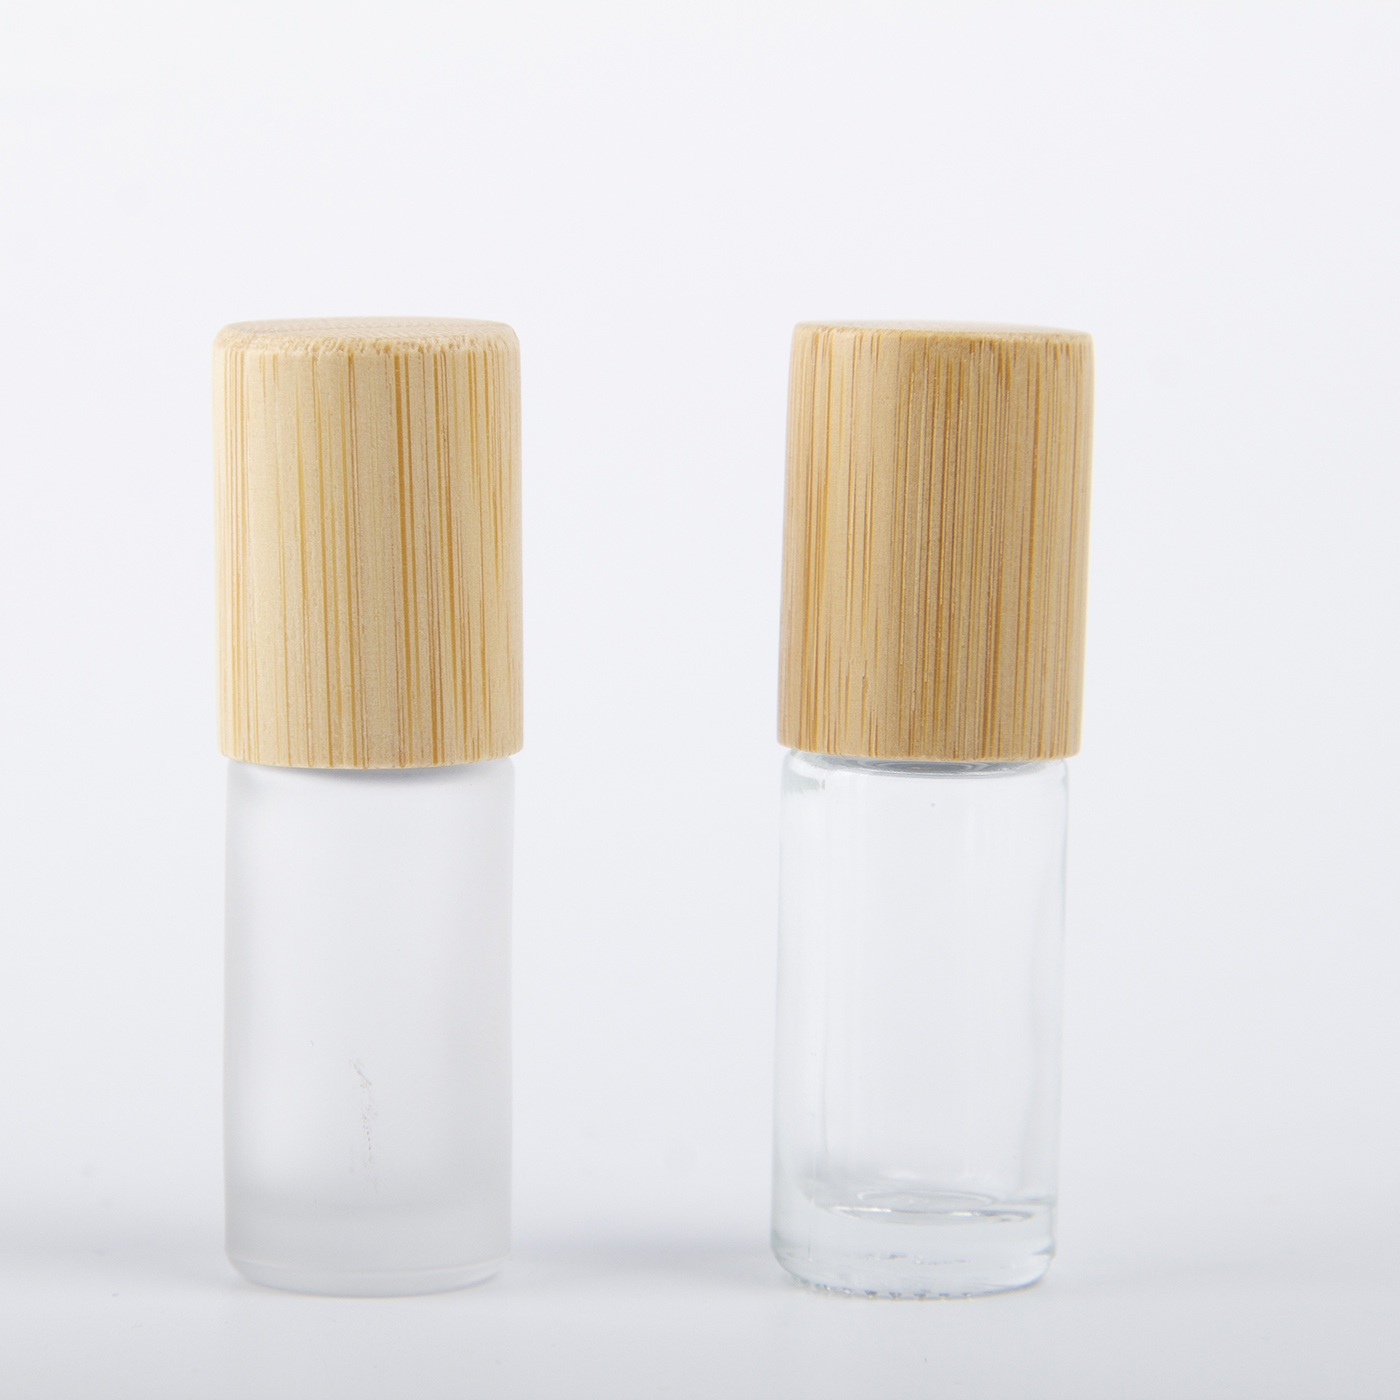 5ml Glass Roll On Bottle With Bamboo lid3